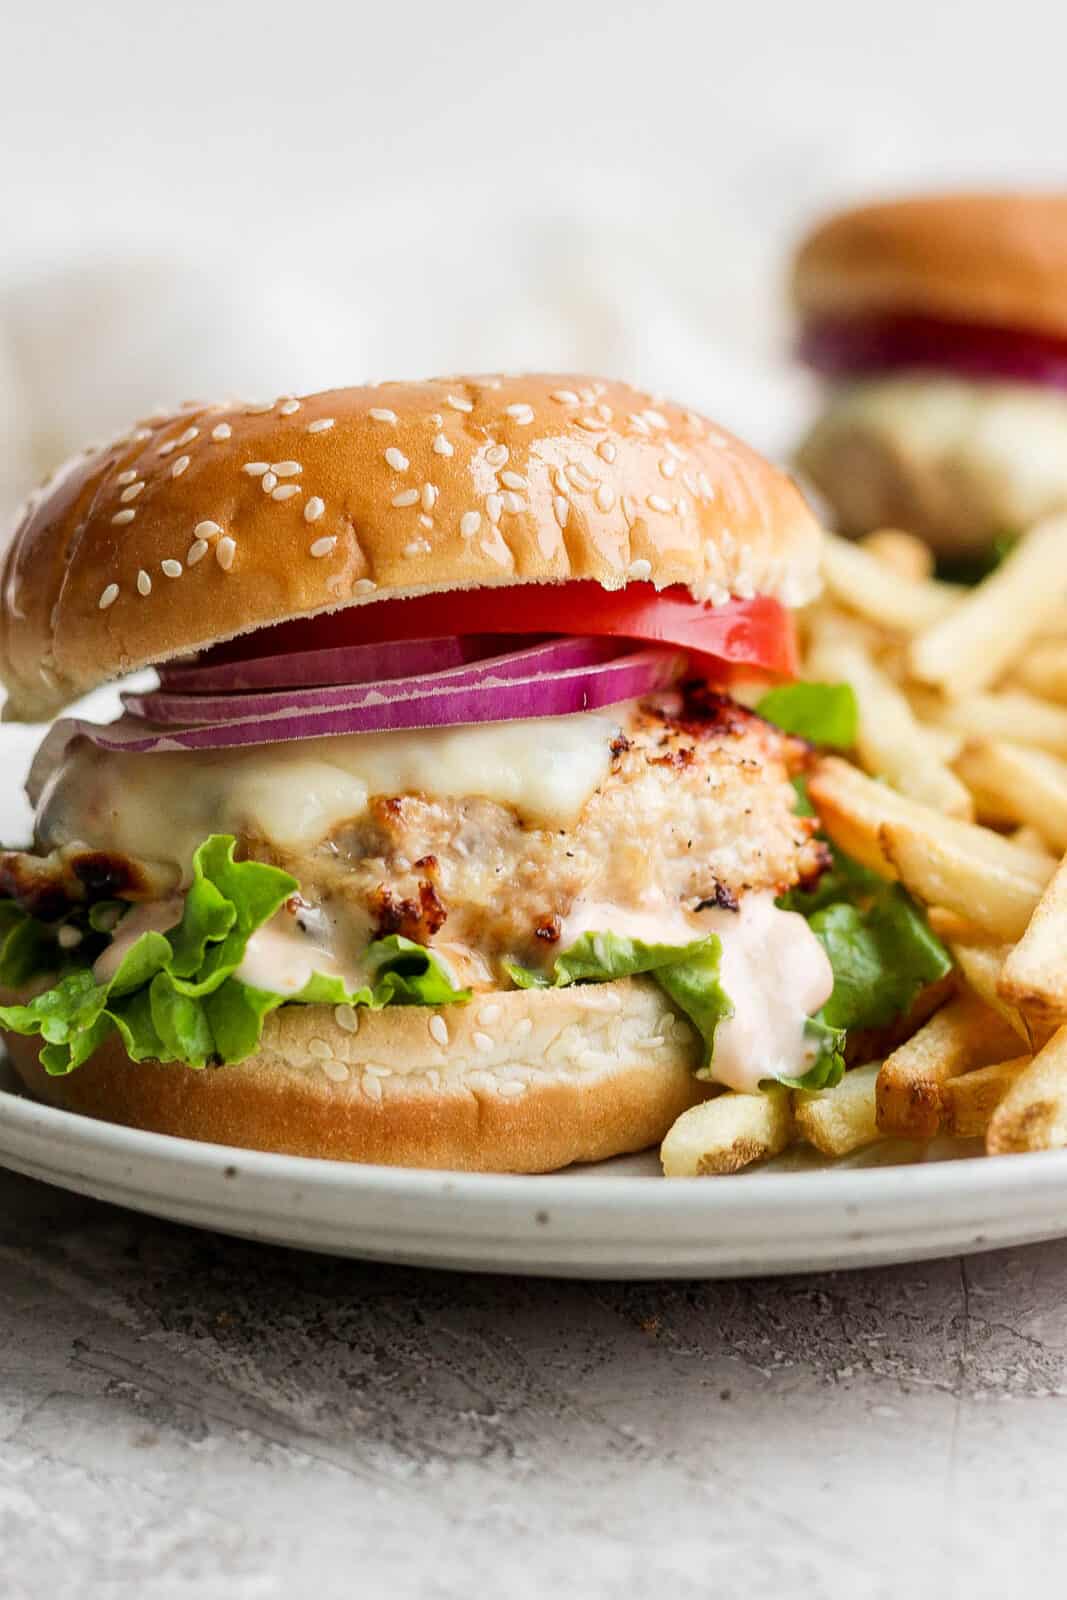 A juicy grilled chicken burger on a plate with french fries.